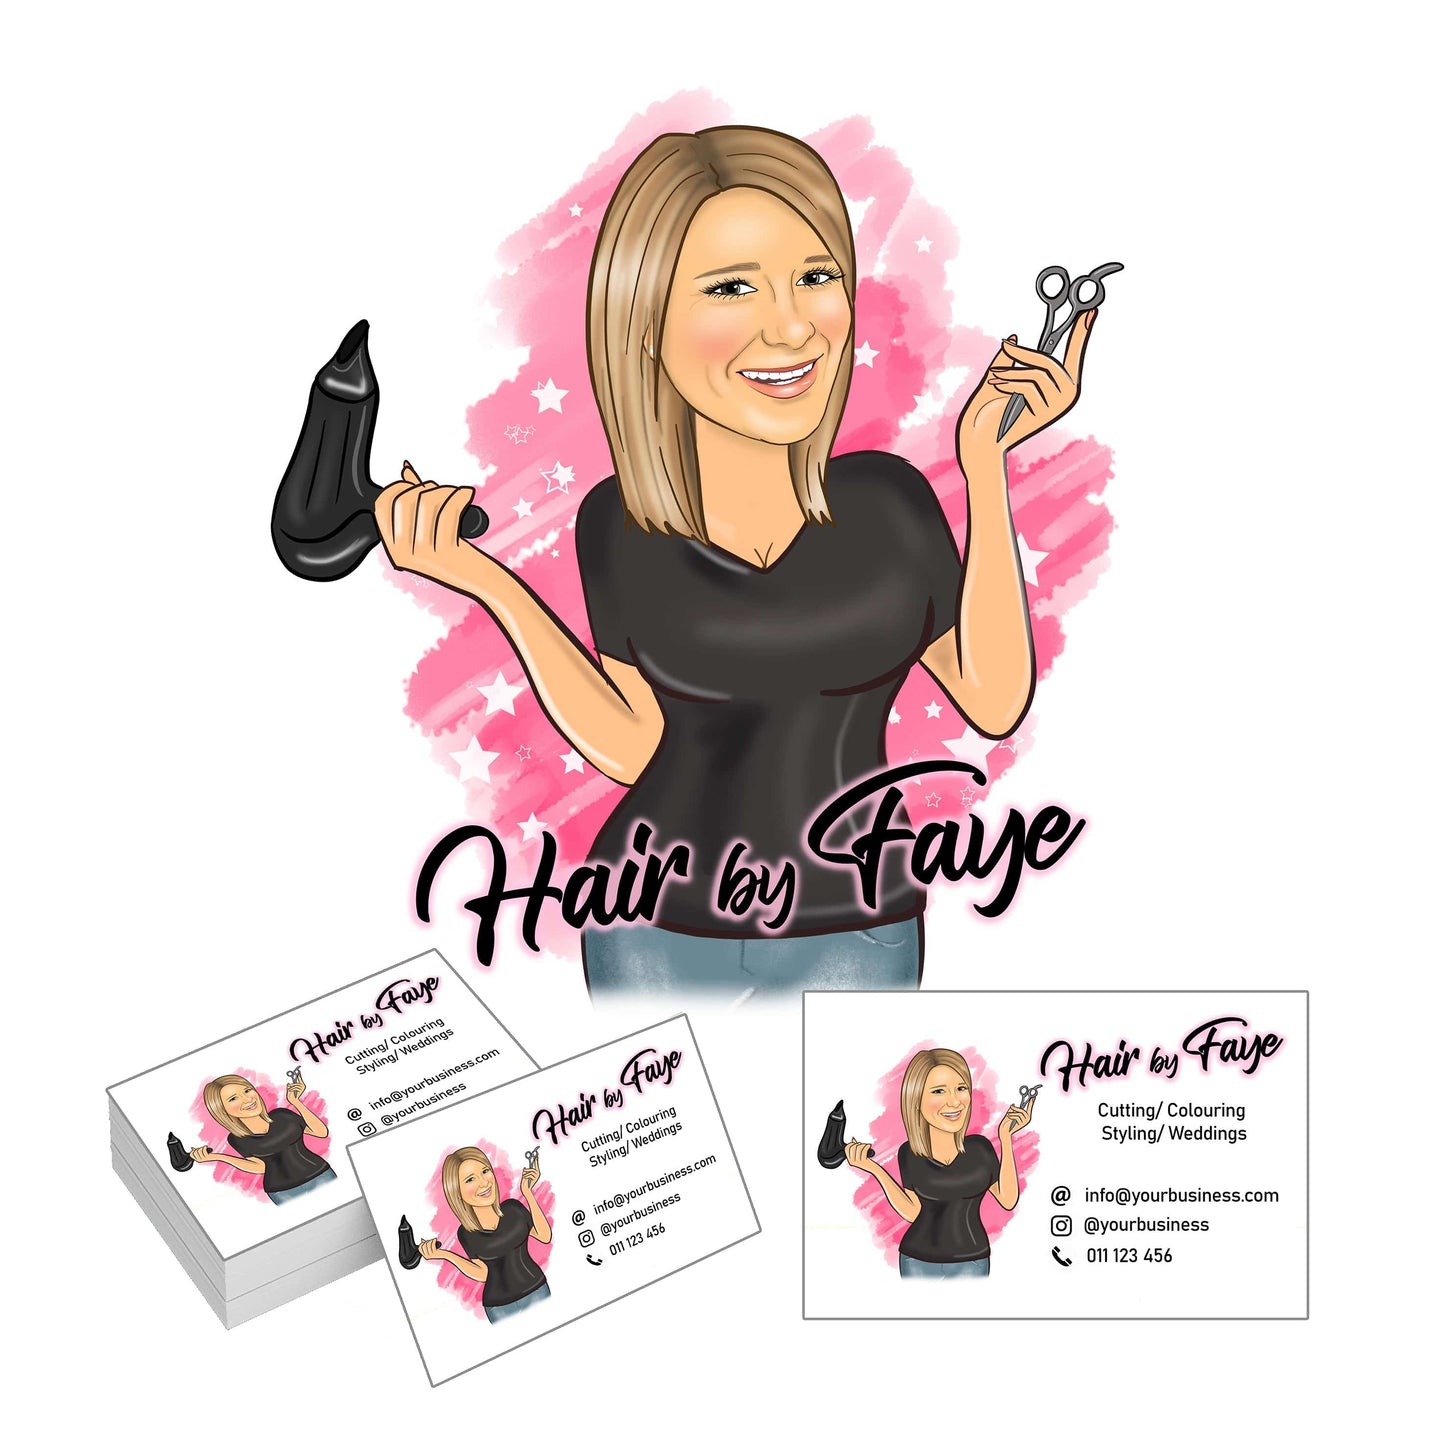 Girly Logo Illustration and 250 business cards